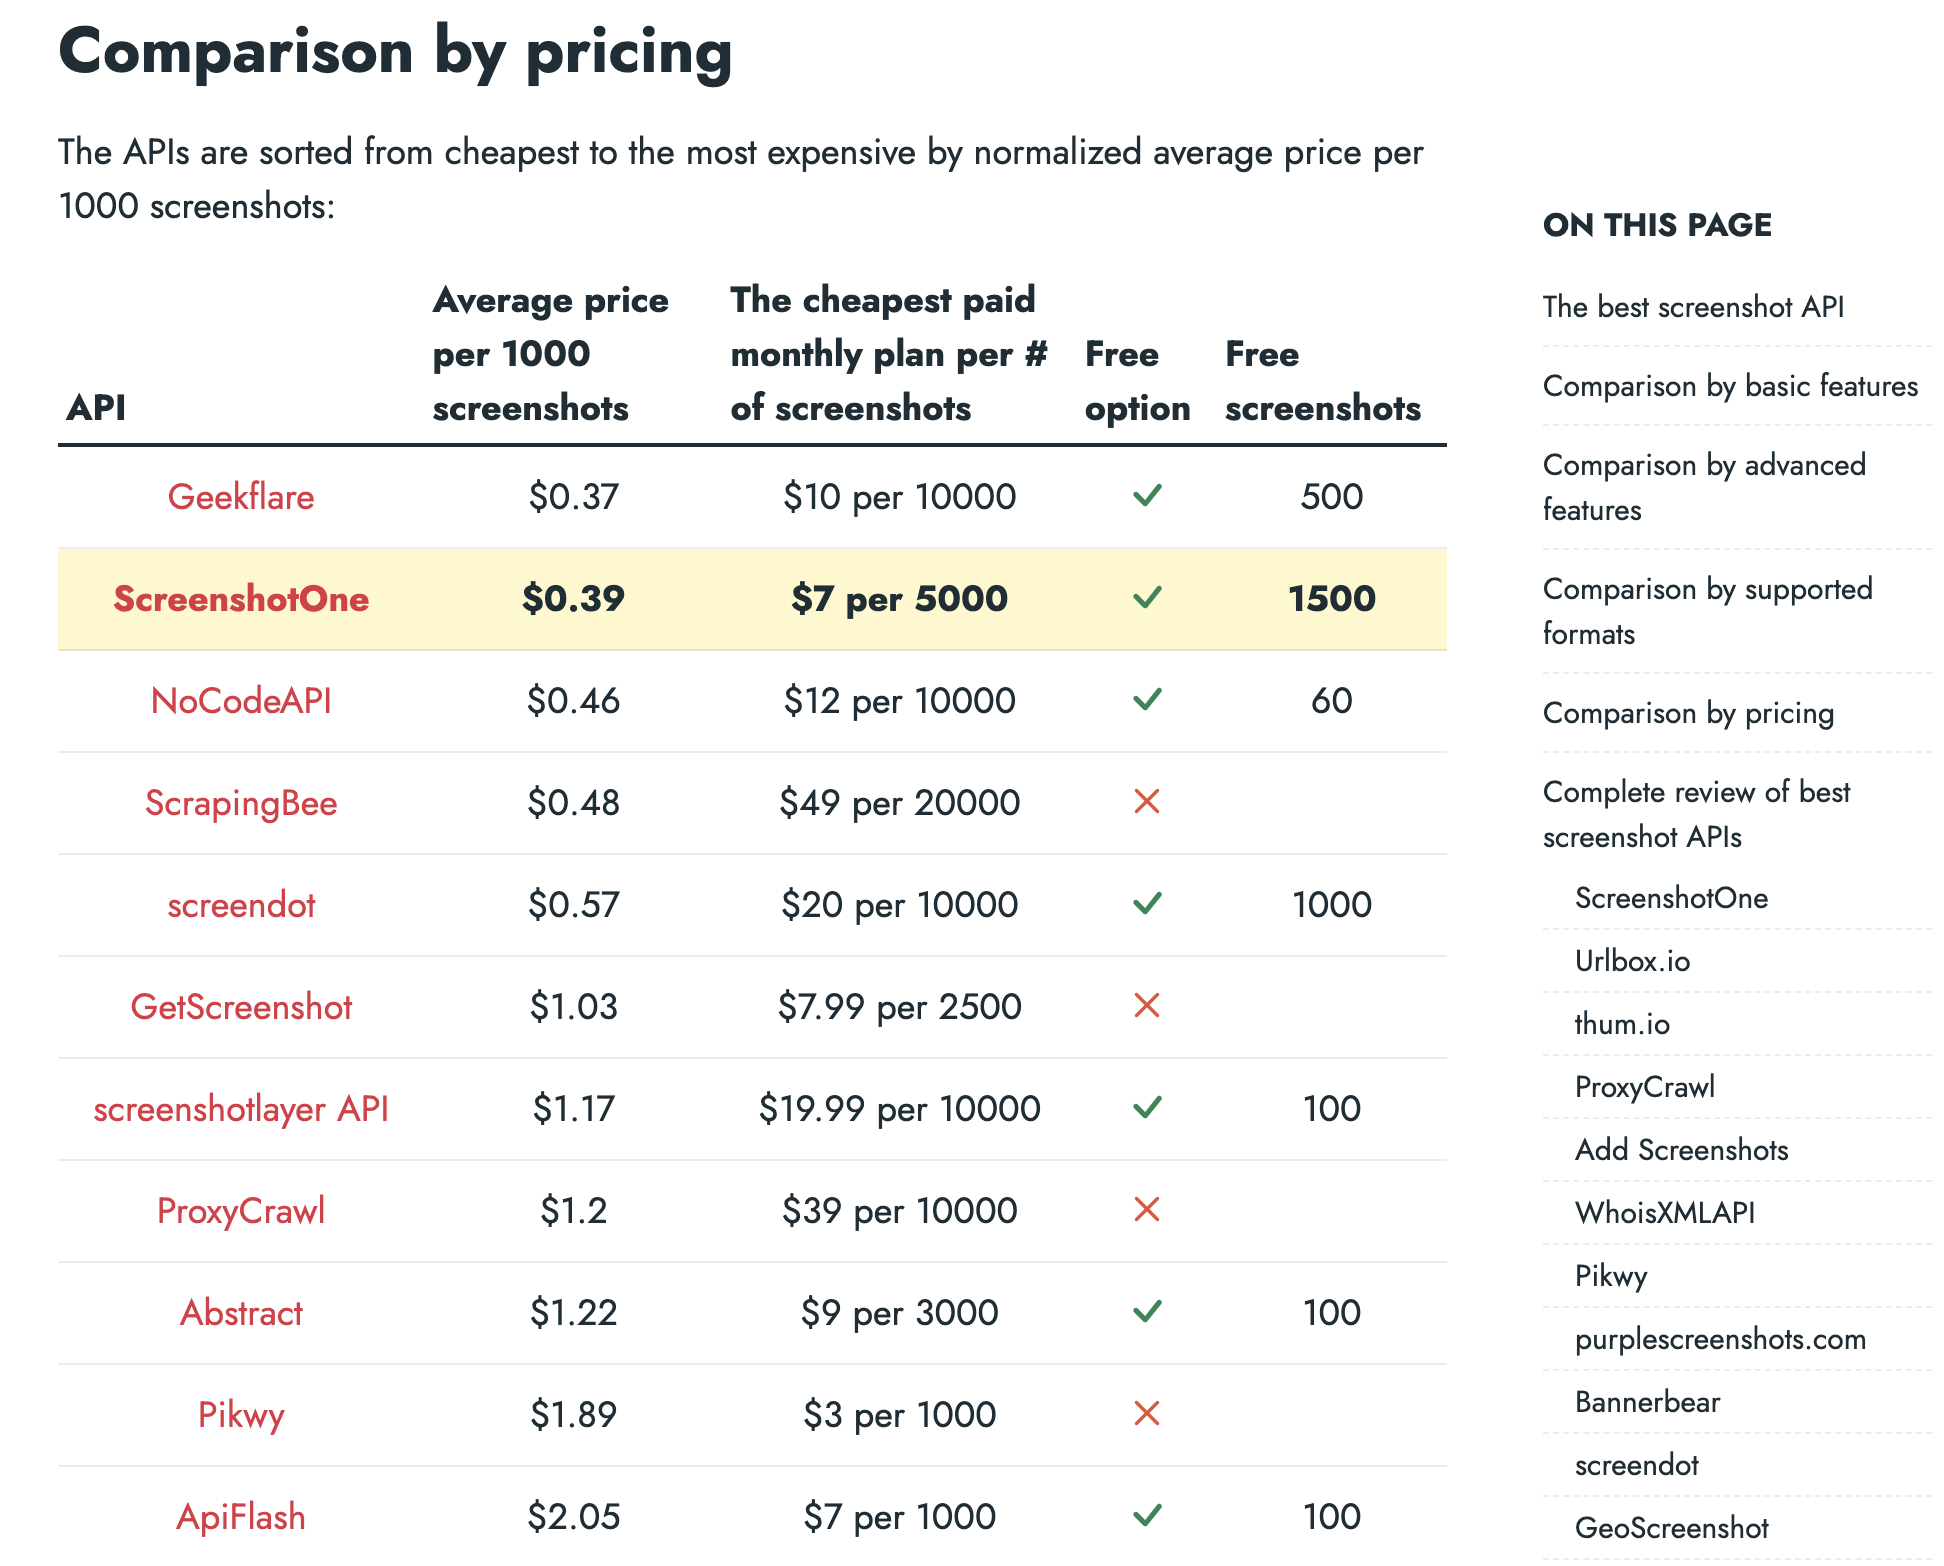 A screenshot of the comparison page by pricing